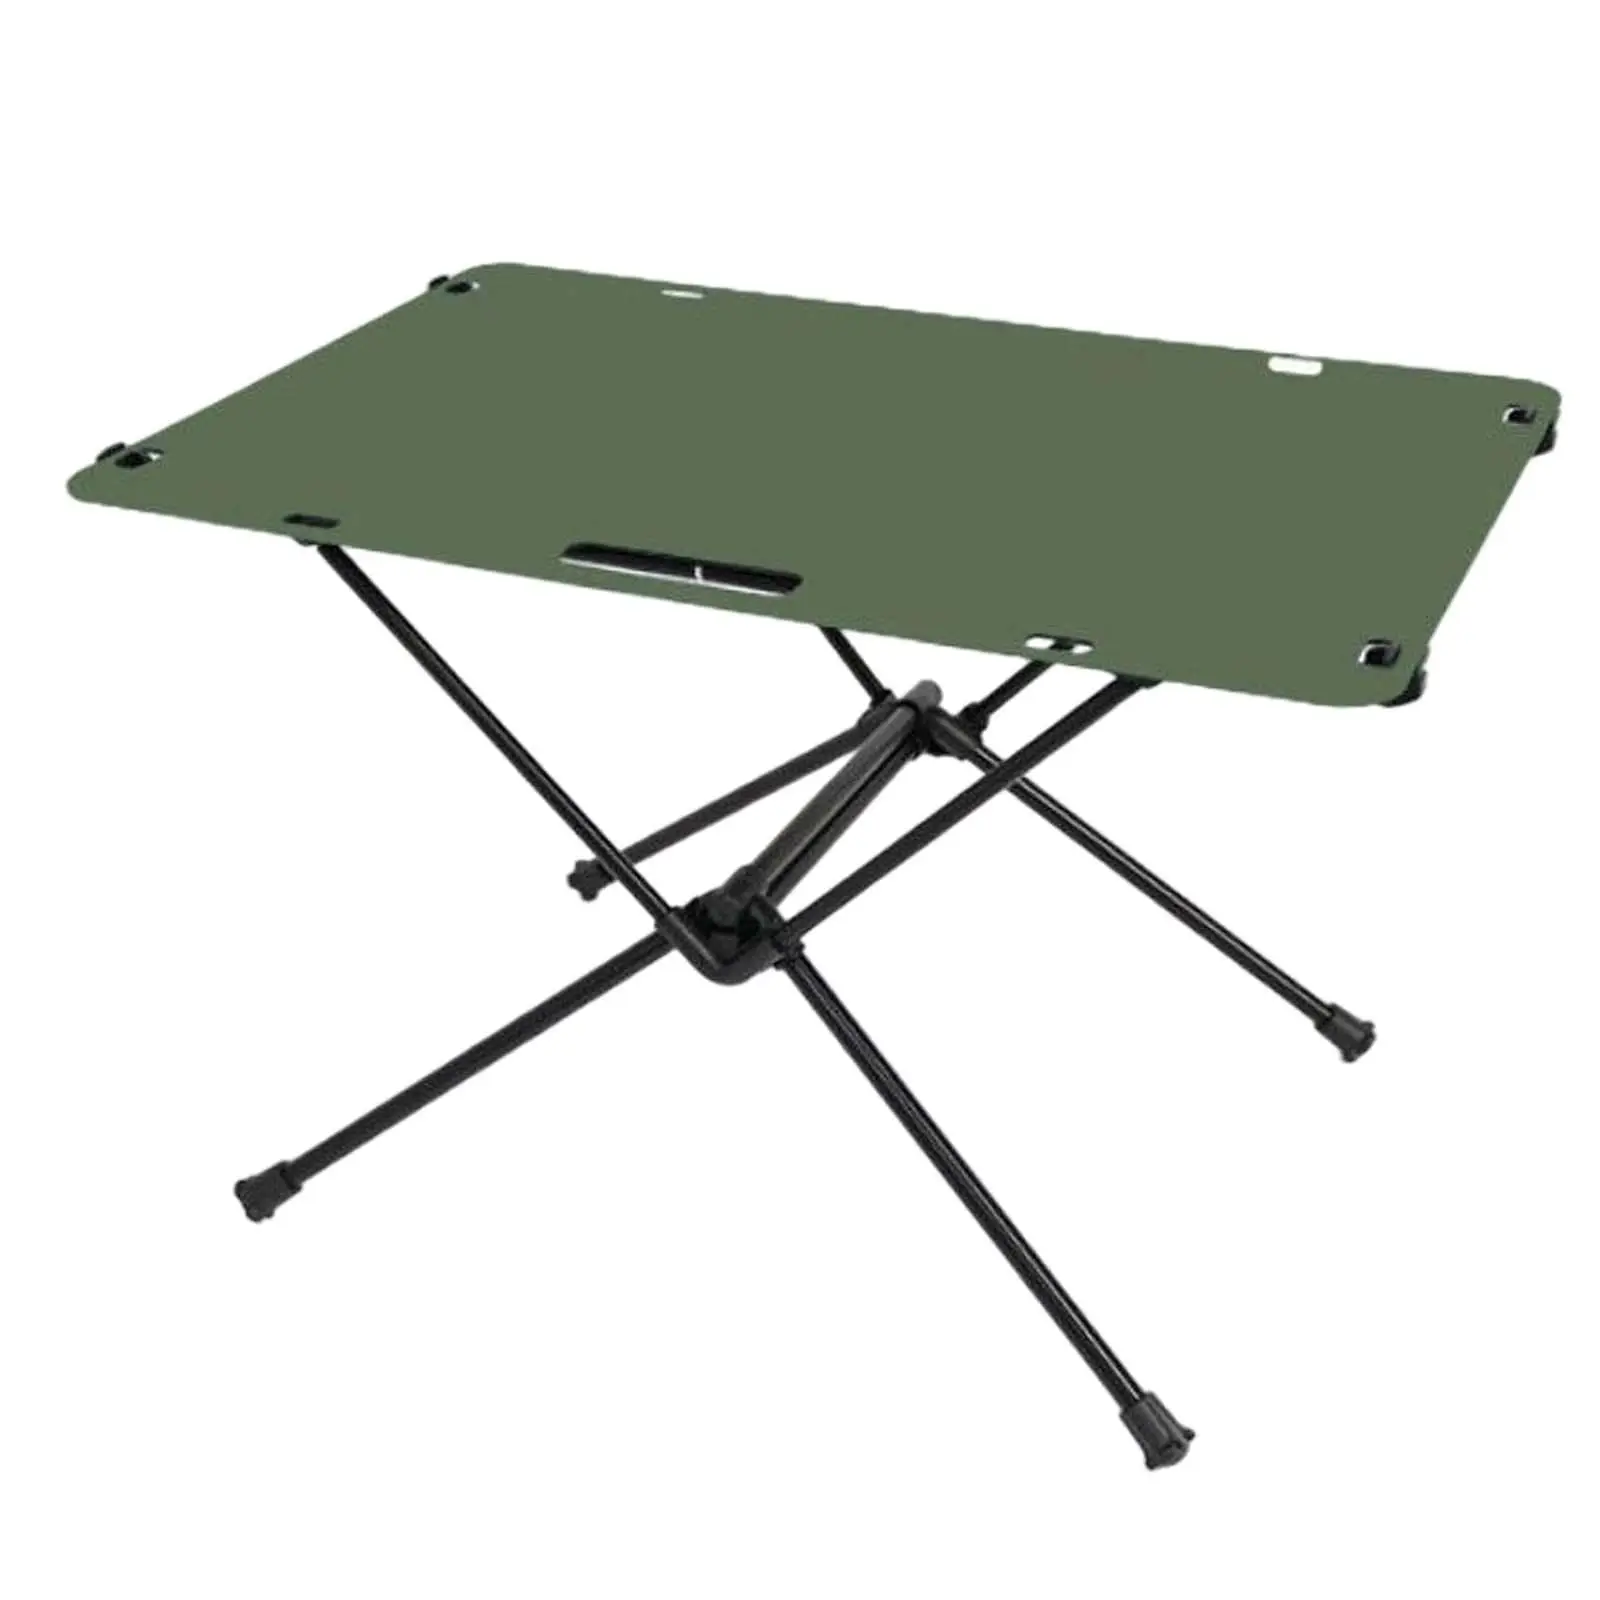 Portable Folding Beach Table with Storage Bag Patio Side Tables Garden Camping Table for Cooking Kitchen Yard Travel Backpacking